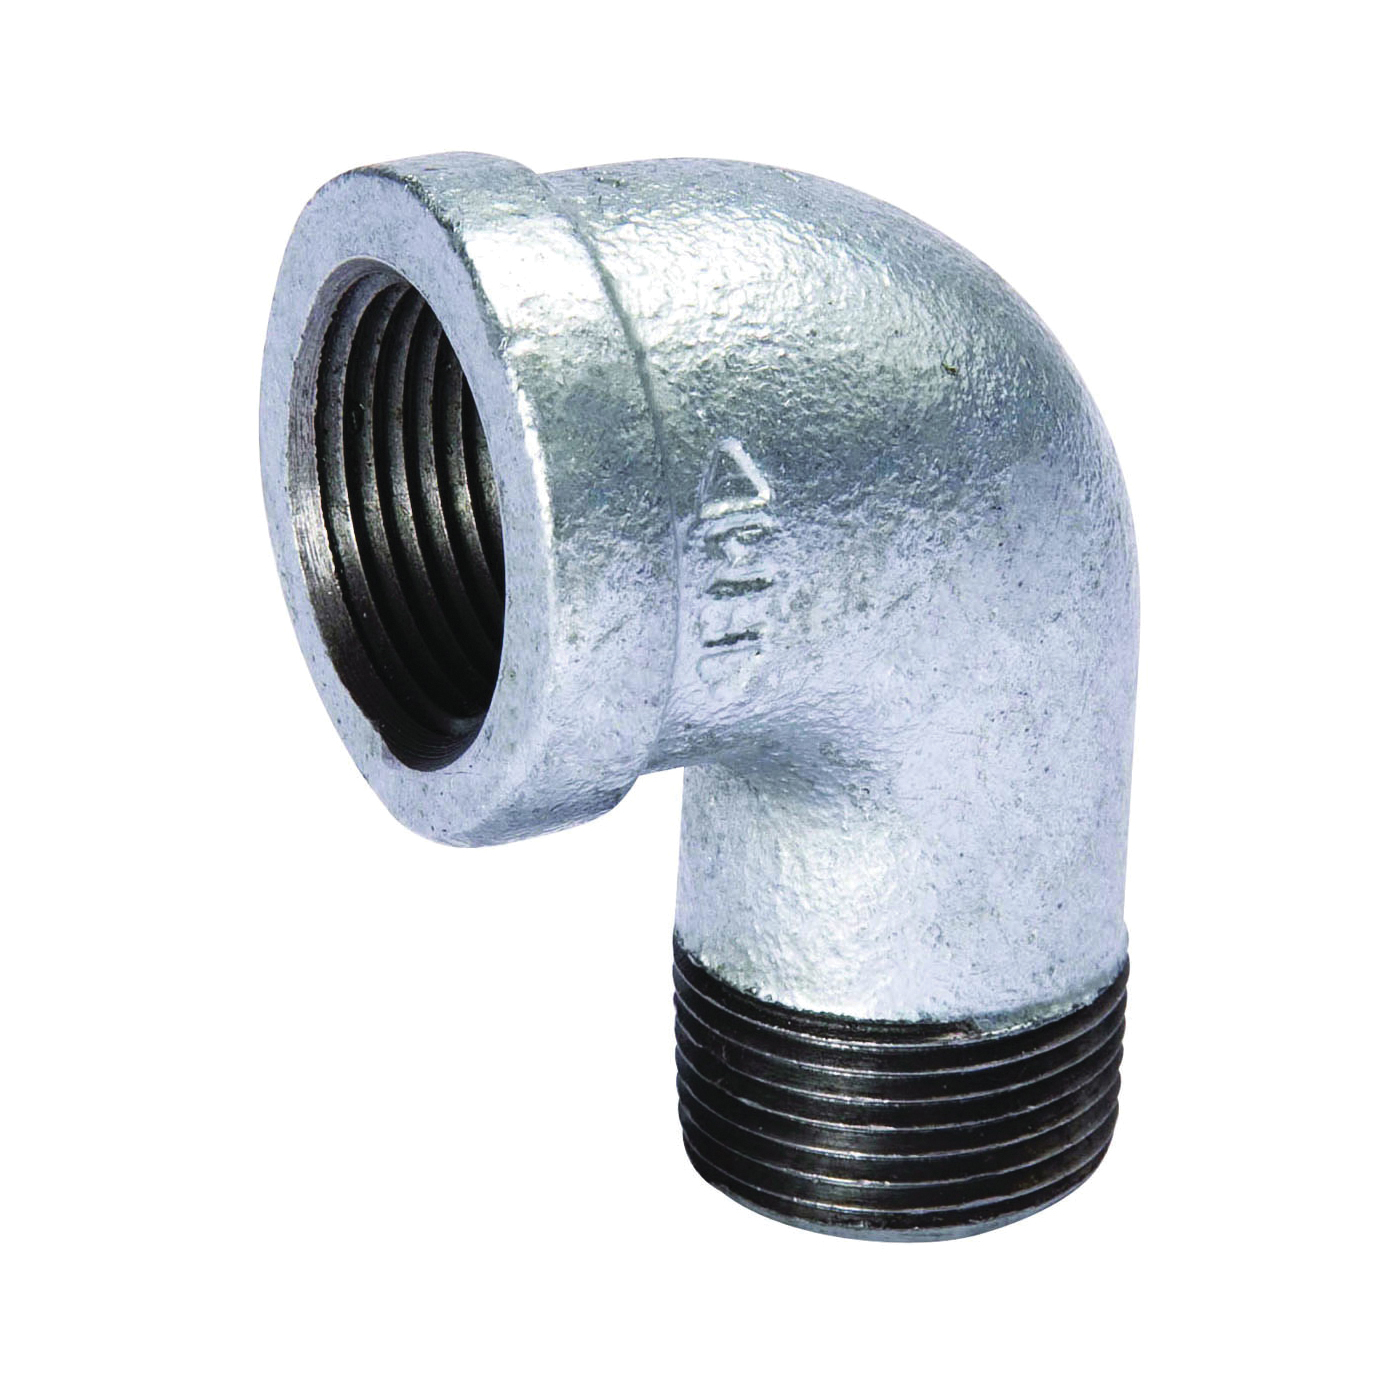 510-311BC Street Pipe Elbow, 4 in, Threaded, 90 deg Angle, 300 psi Pressure